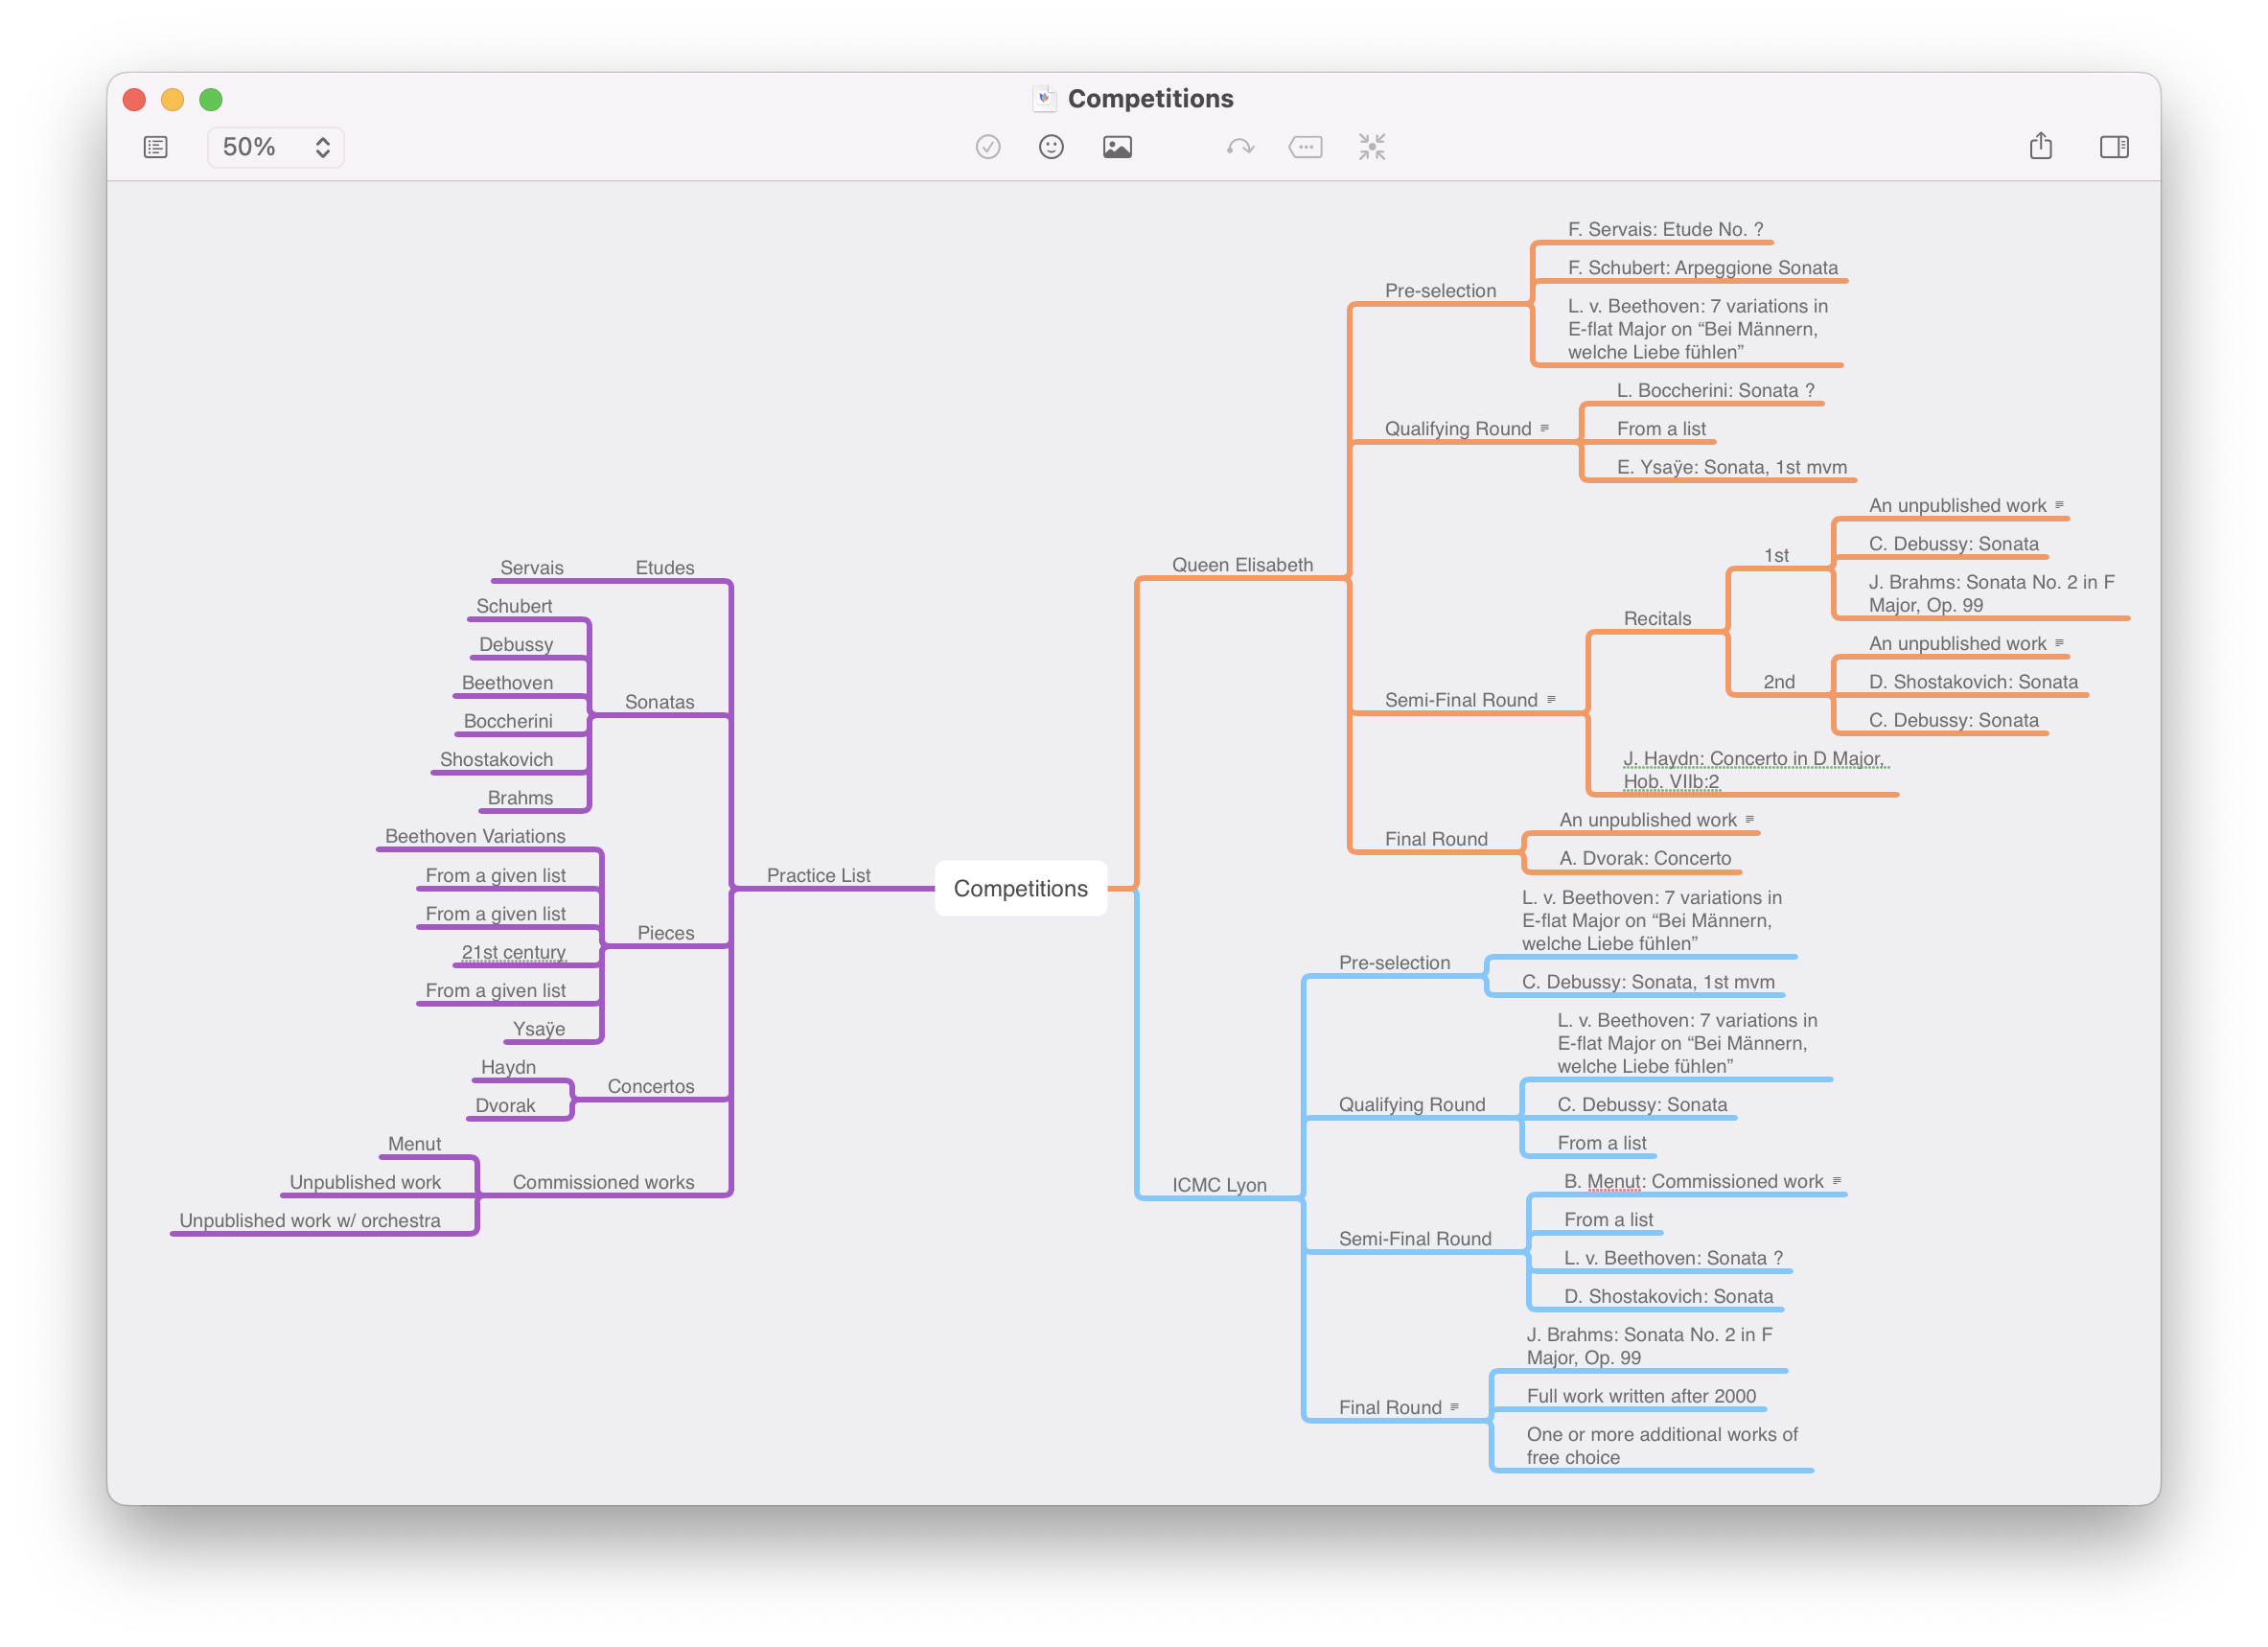 Mislav's mind map about upcoming musical competitions